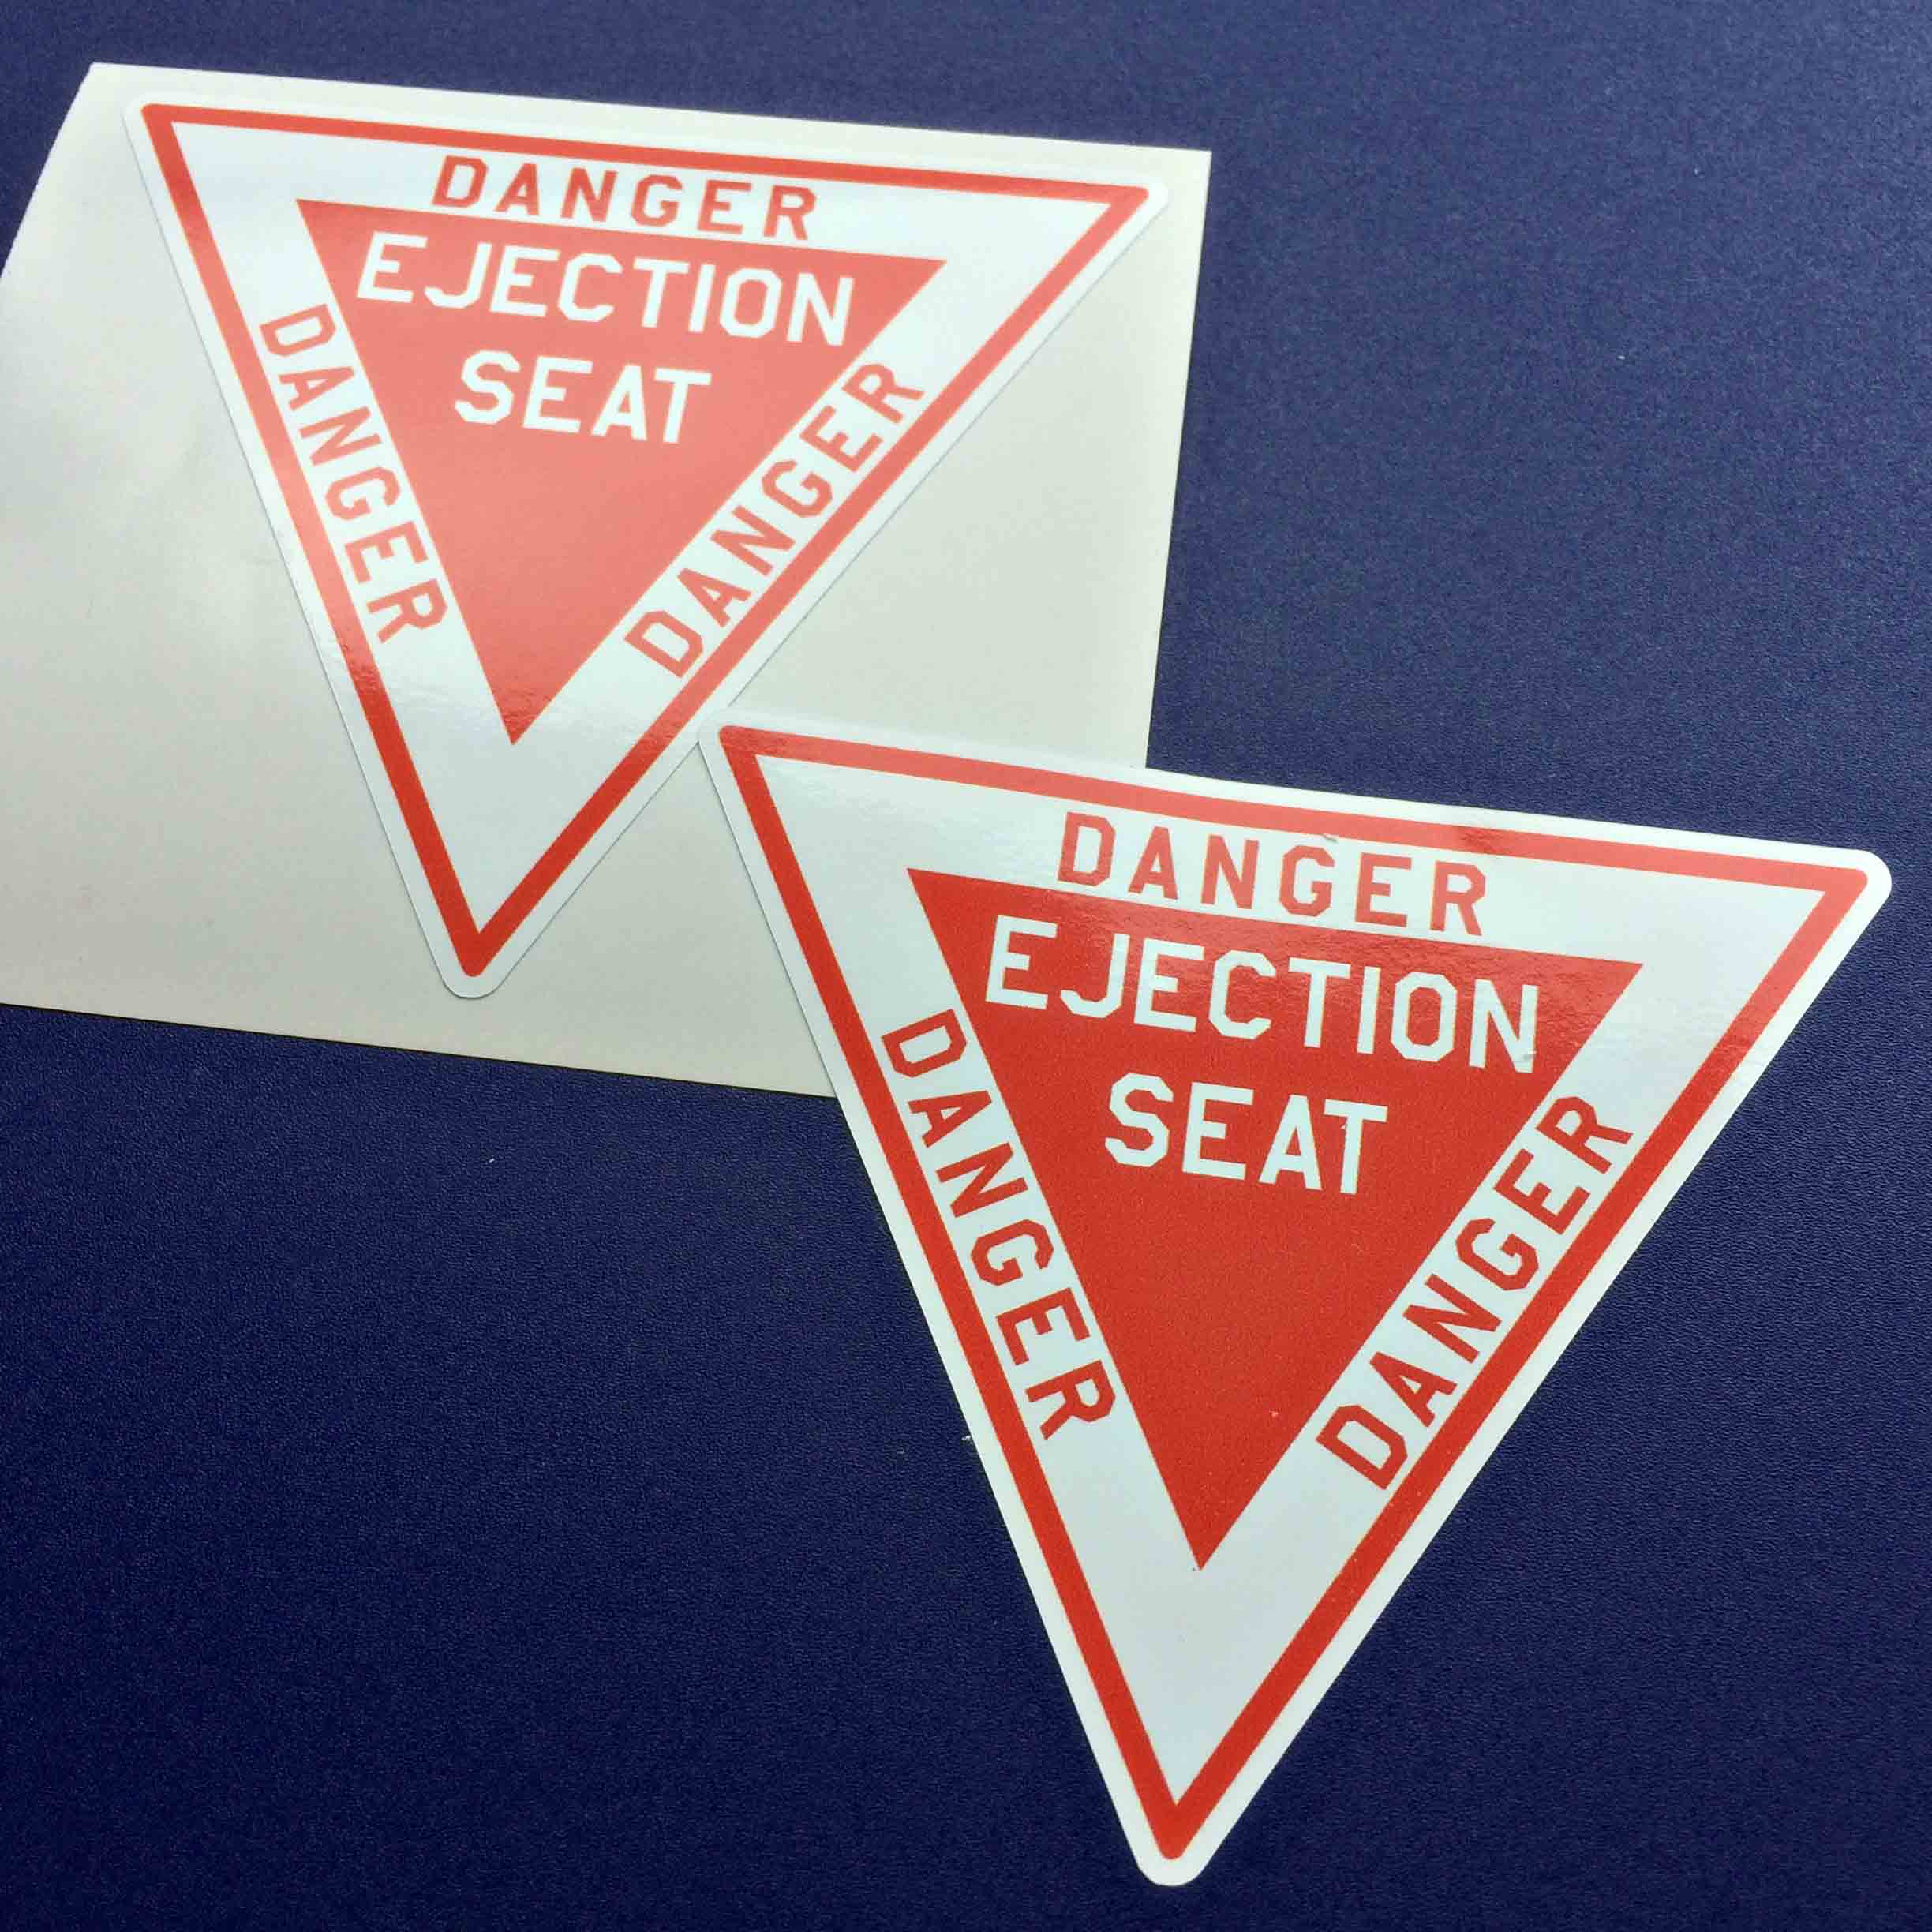 DANGER EJECTION SEAT STICKERS. Danger in red lettering on three sides of an inverted white triangle with a red border. Inside on a smaller red triangle is Ejection Seat in white lettering.